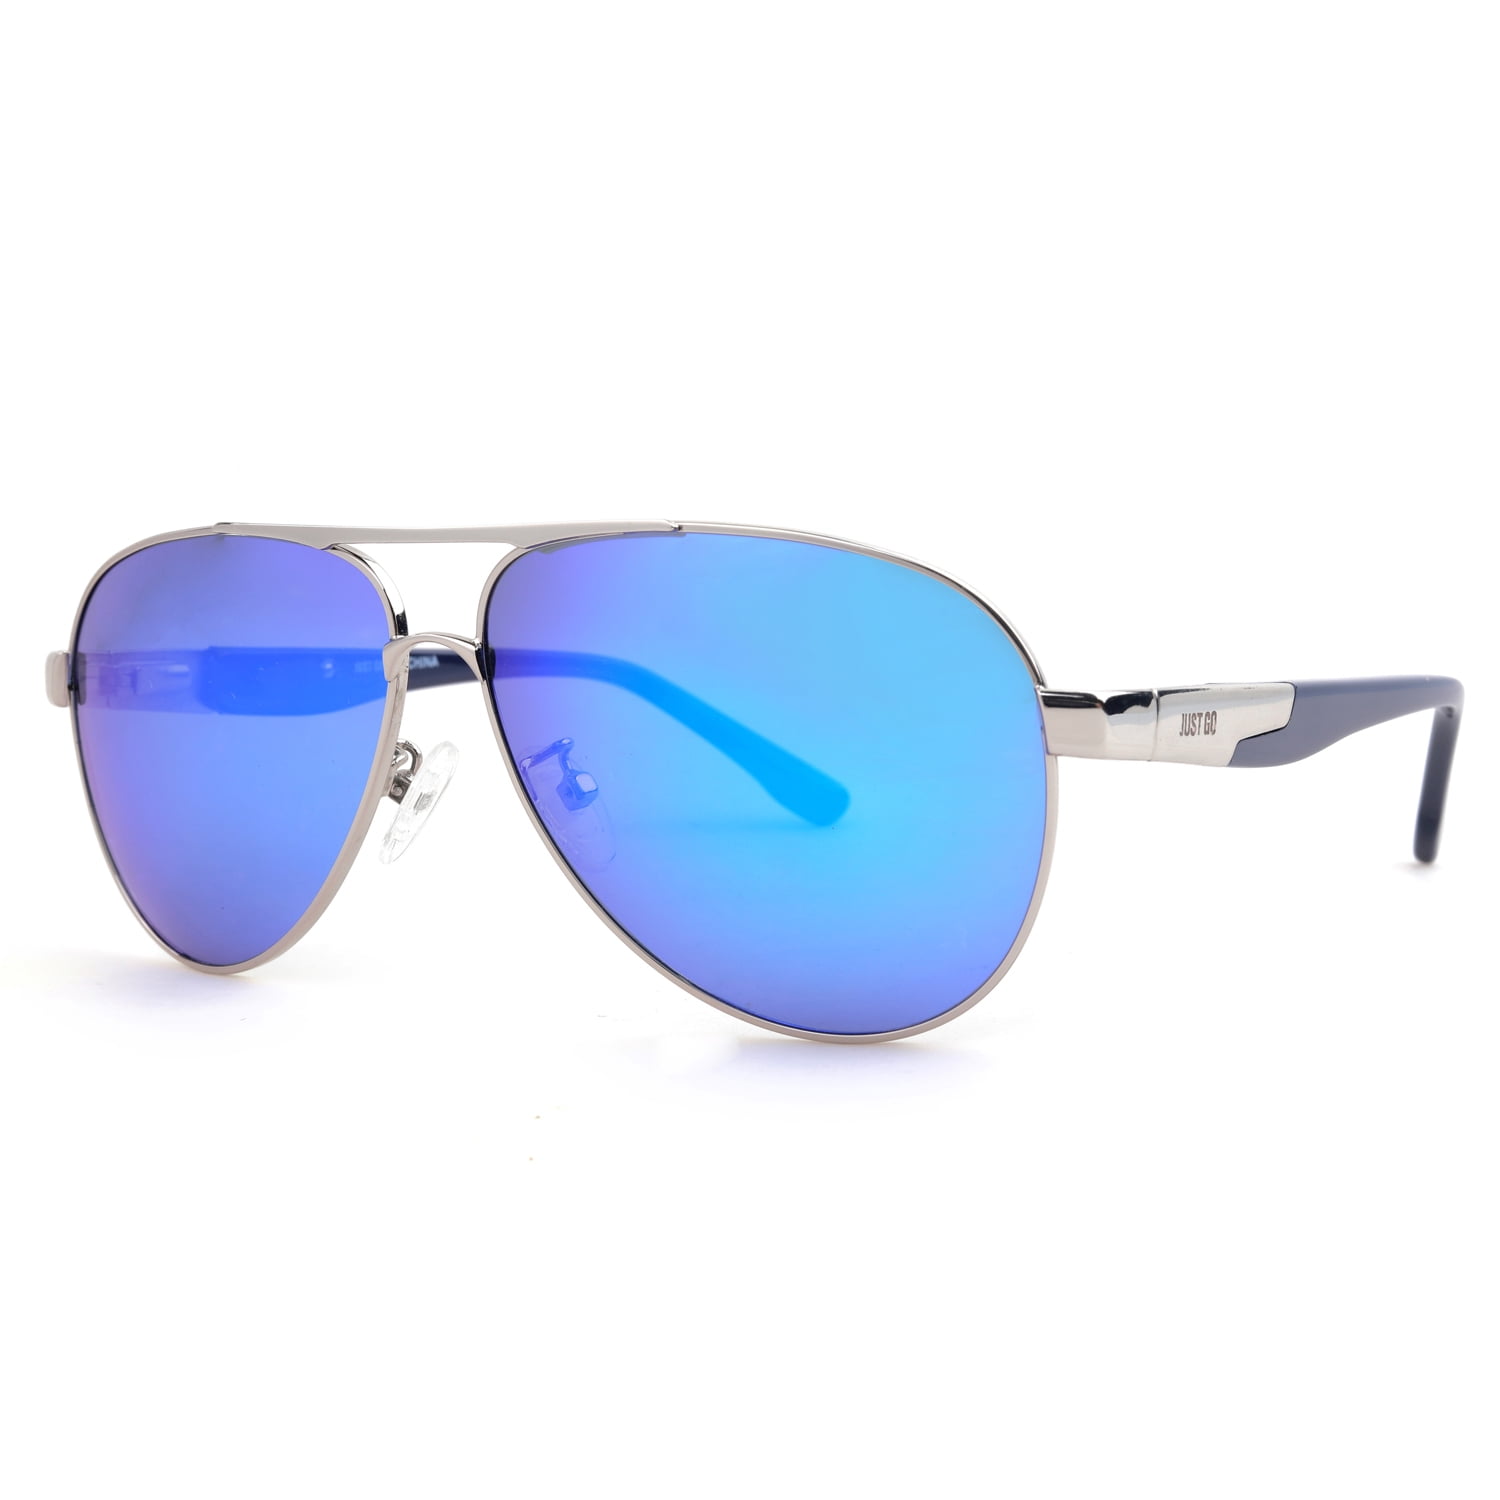 JUST Blue 100%UV Spring Protection Silver, with and Polarized GO for Hinge, Aviator Women, Style Sunglasses Men Rove